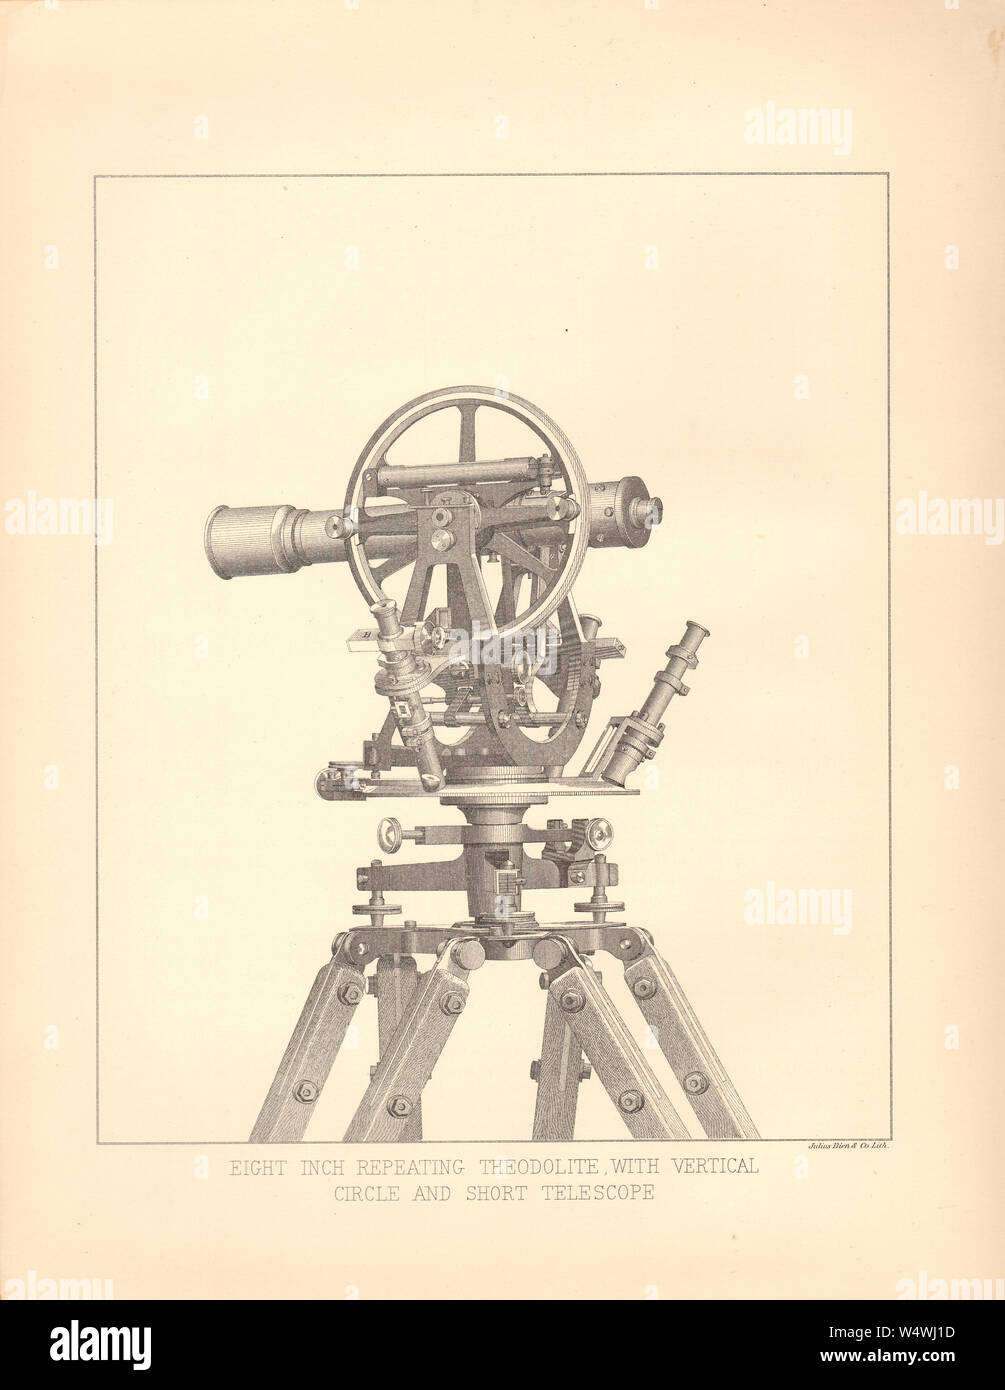 Eight-inch repeating theodolite with Vertical Circle and Short Telescope arranged for measuring zenith distances - Antiquarian bookplate illustration Stock Photo